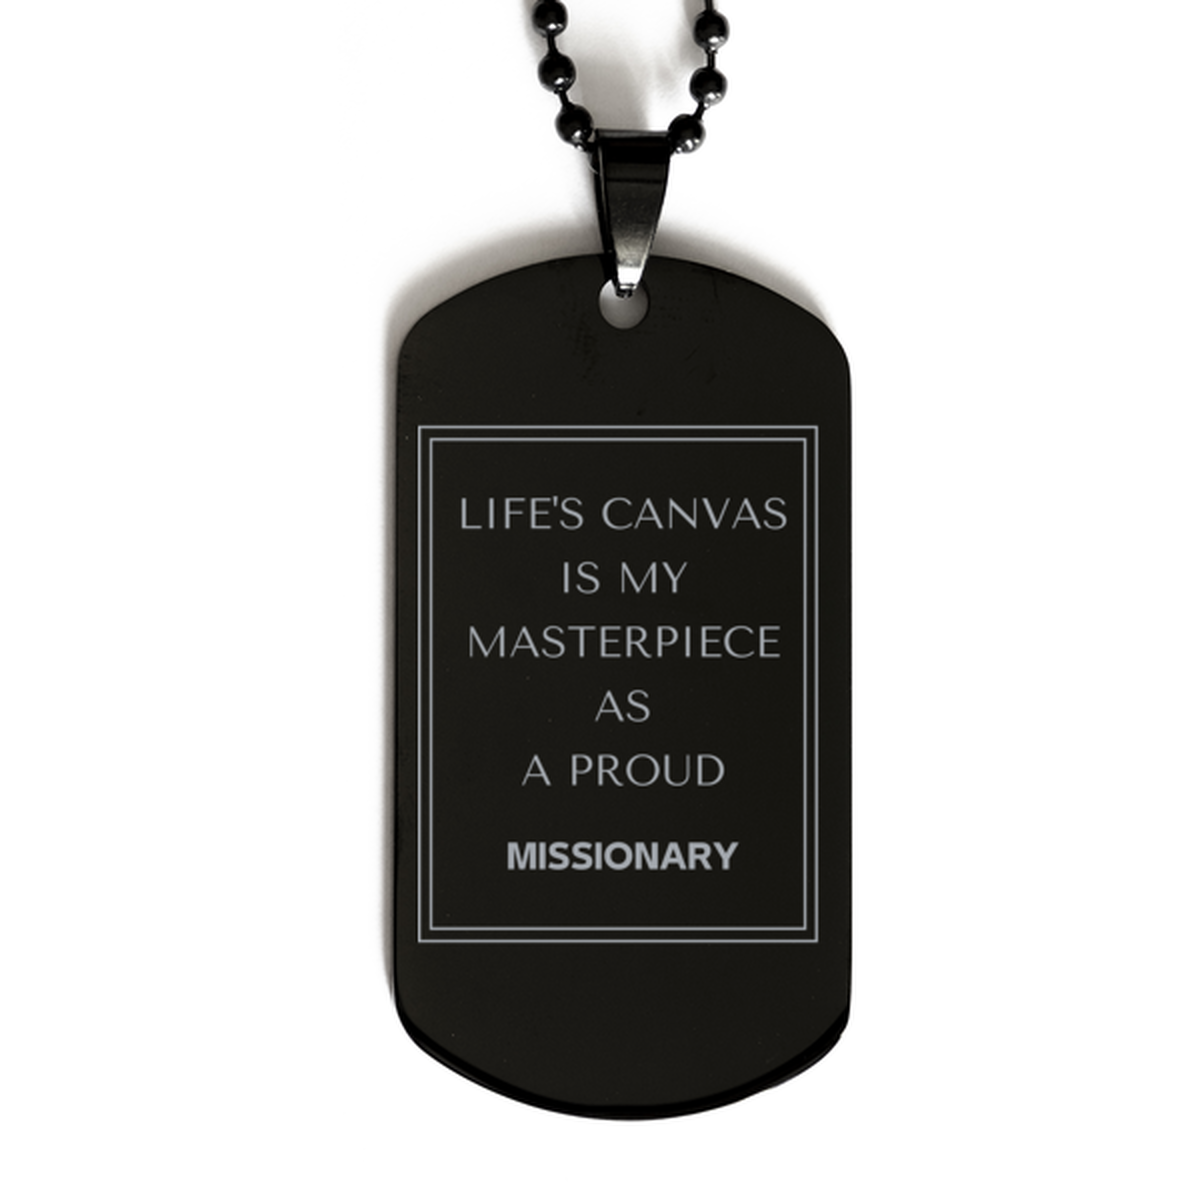 Proud Missionary Gifts, Life's canvas is my masterpiece, Epic Birthday Christmas Unique Black Dog Tag For Missionary, Coworkers, Men, Women, Friends